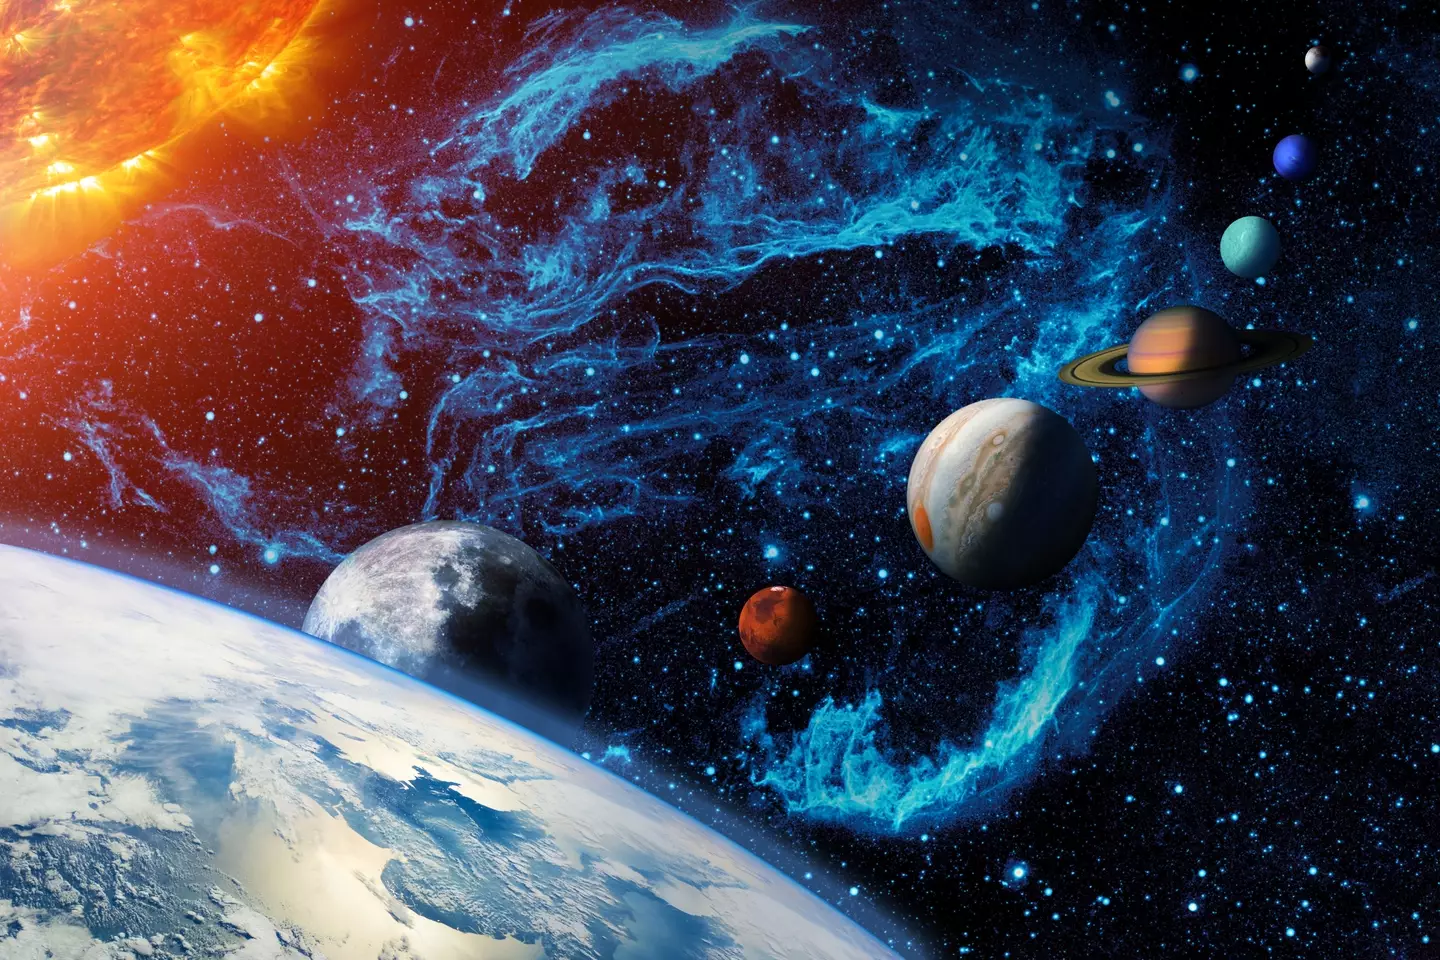 Scientists are aware of Earth-like planets across the galaxy.